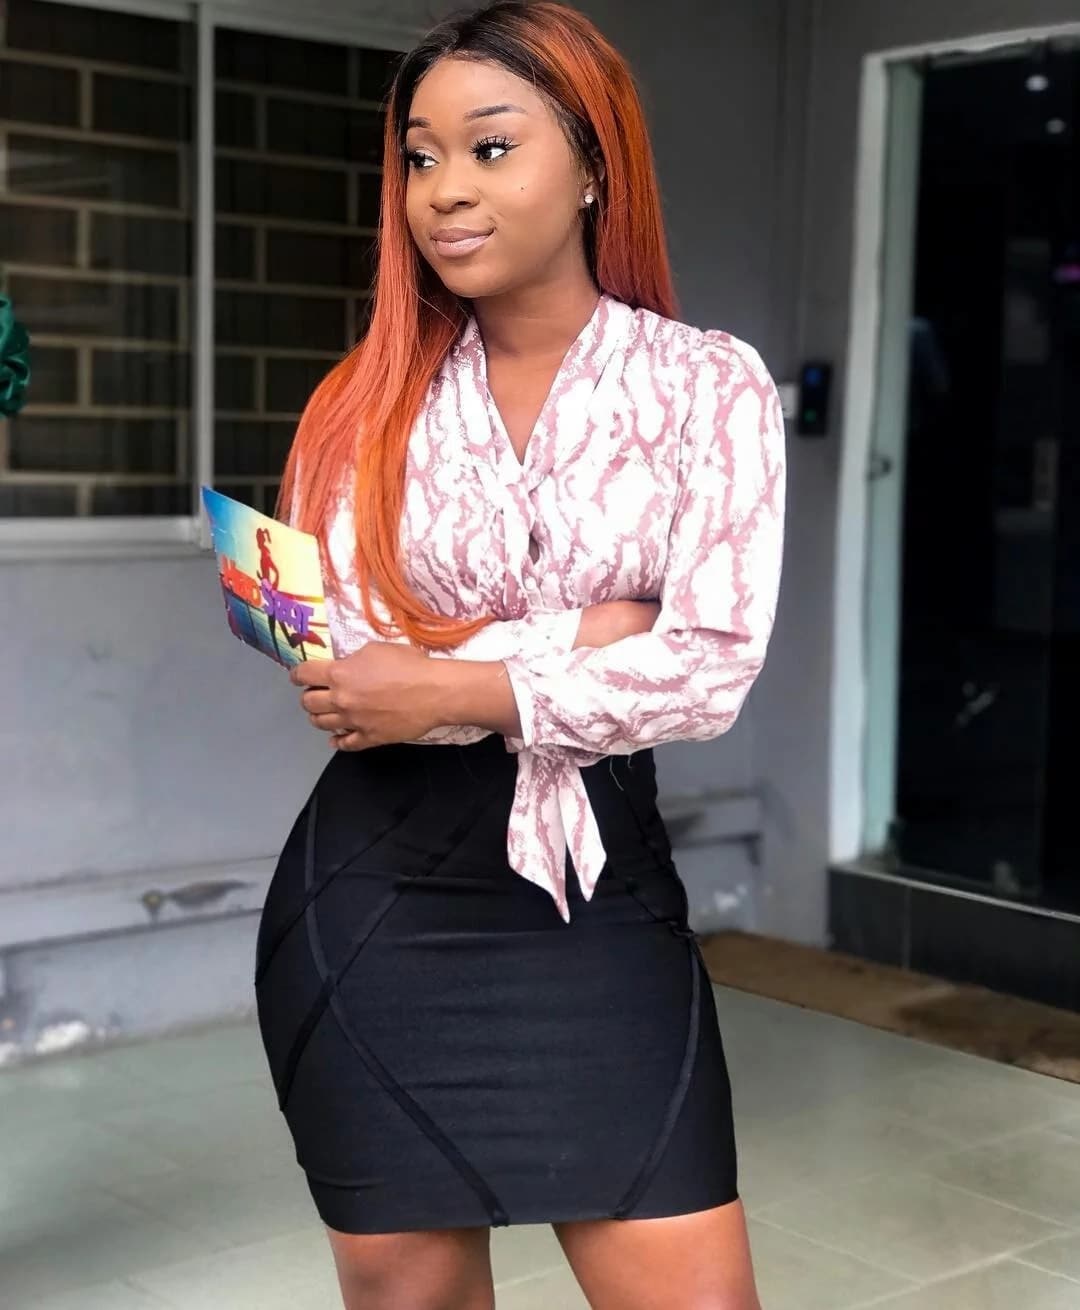 Efia Odo has joined Kwese TV as sports presenter